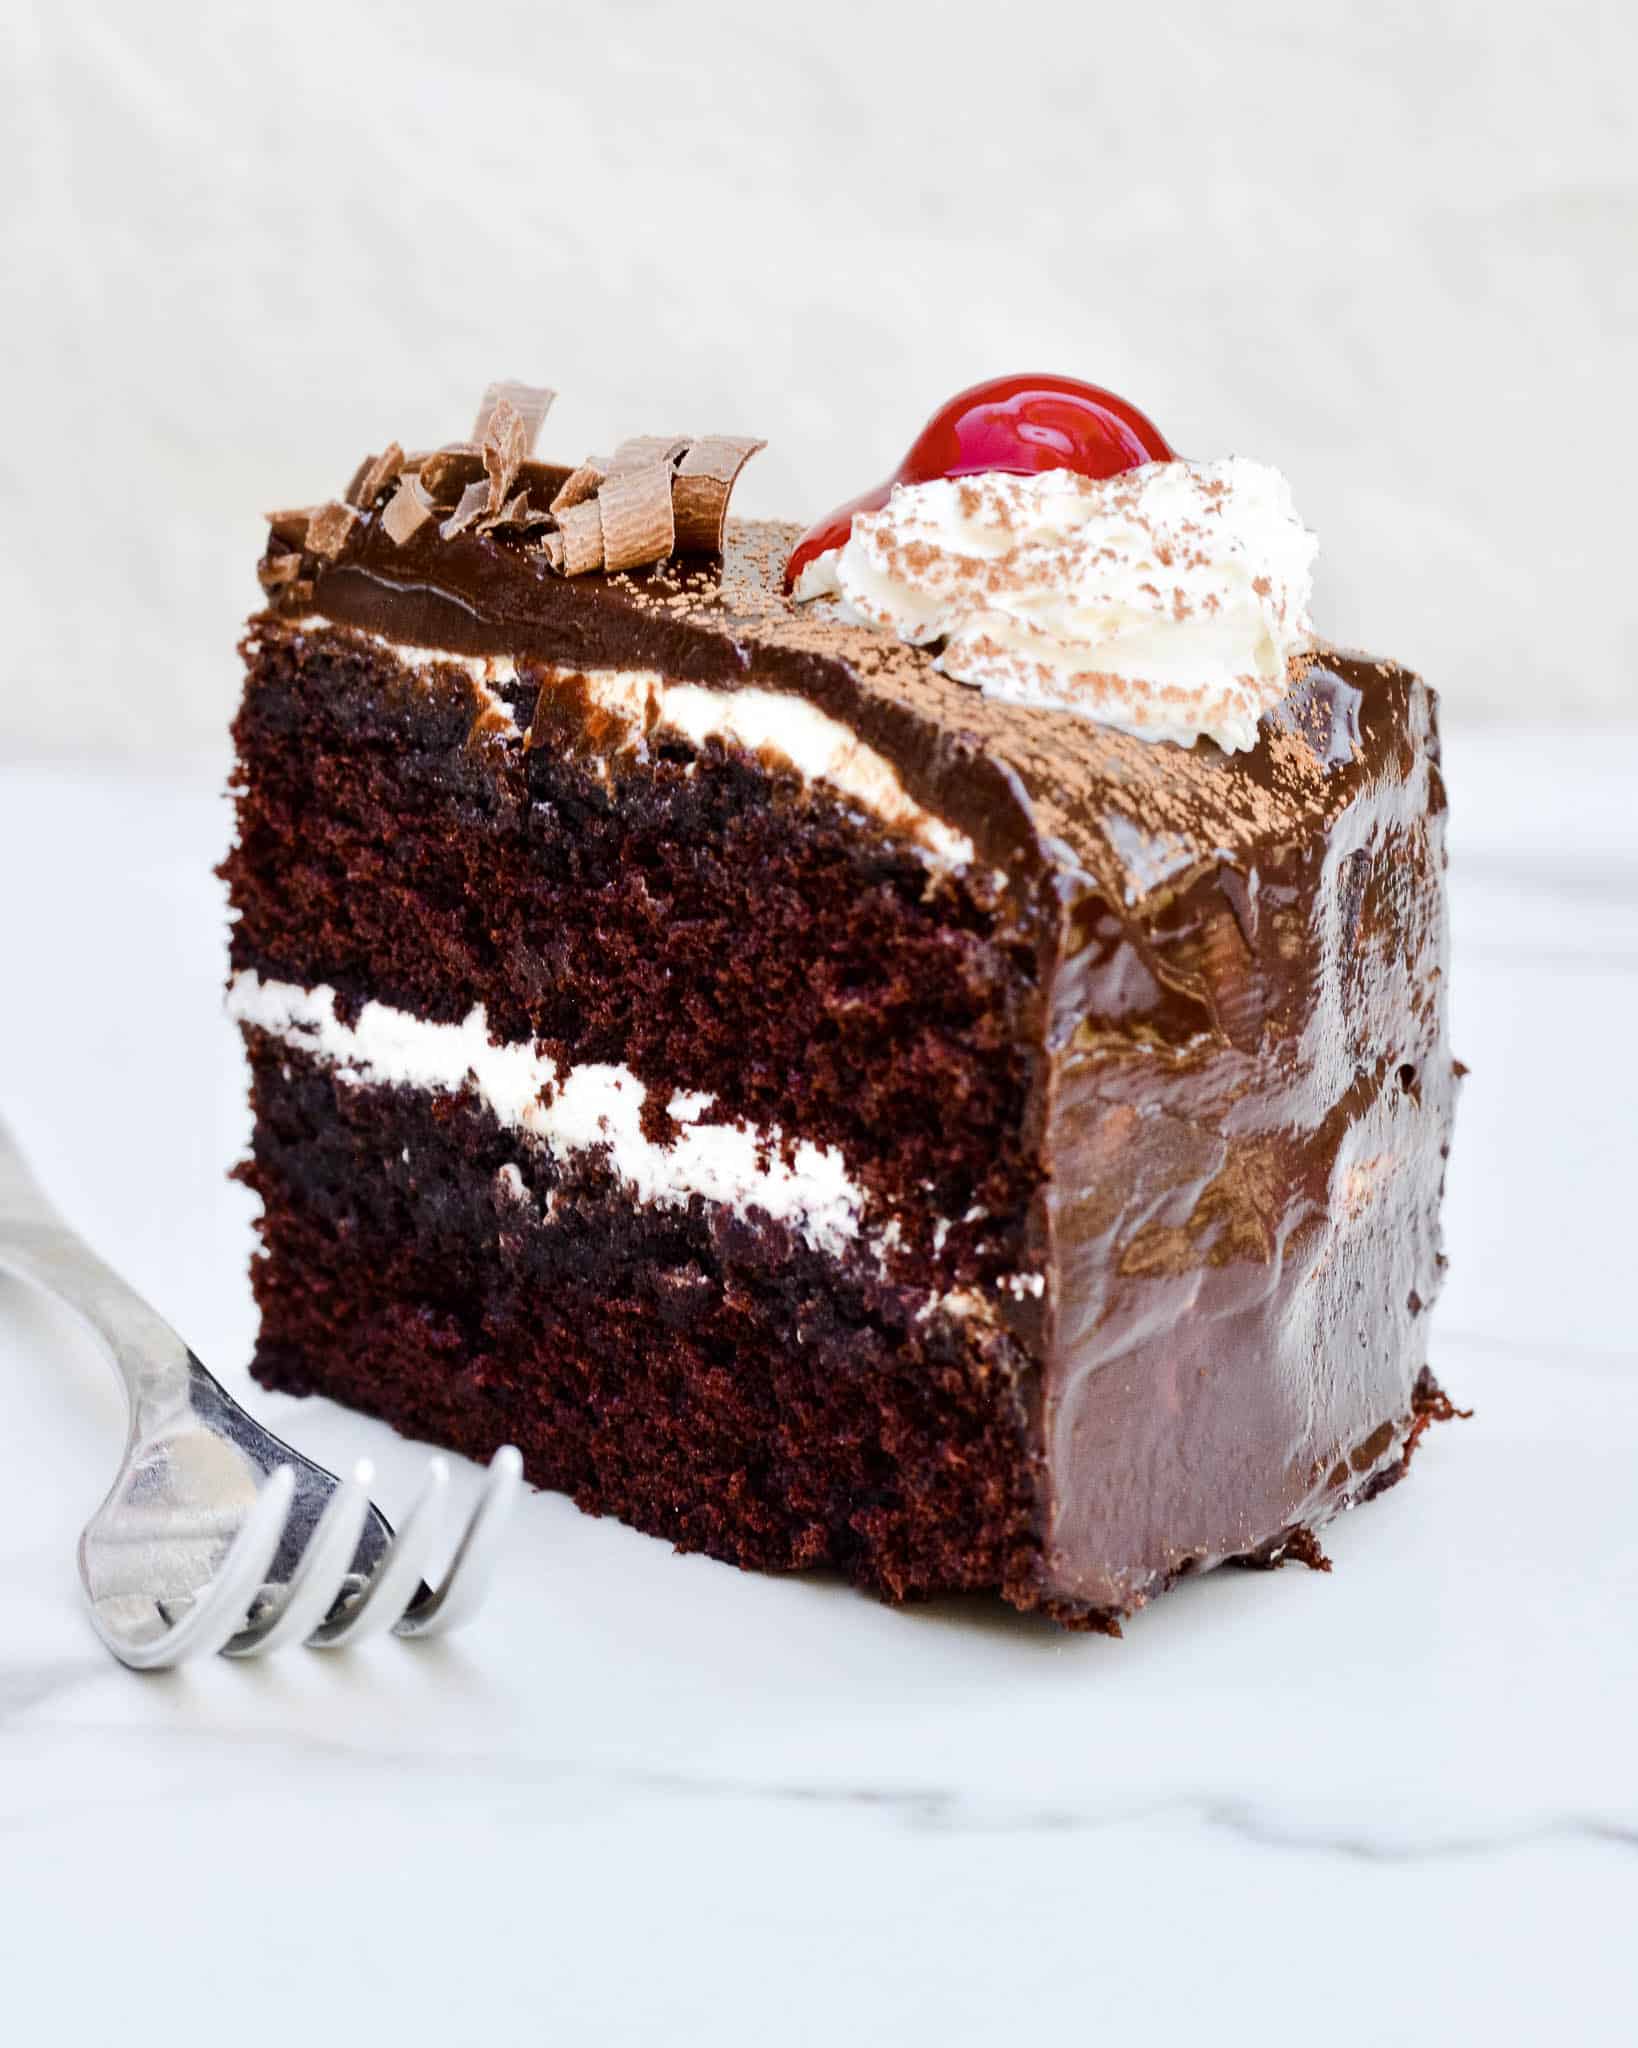 Slice of black forest cake with fork. Chocolate ganache and cherry on top with whip cream.